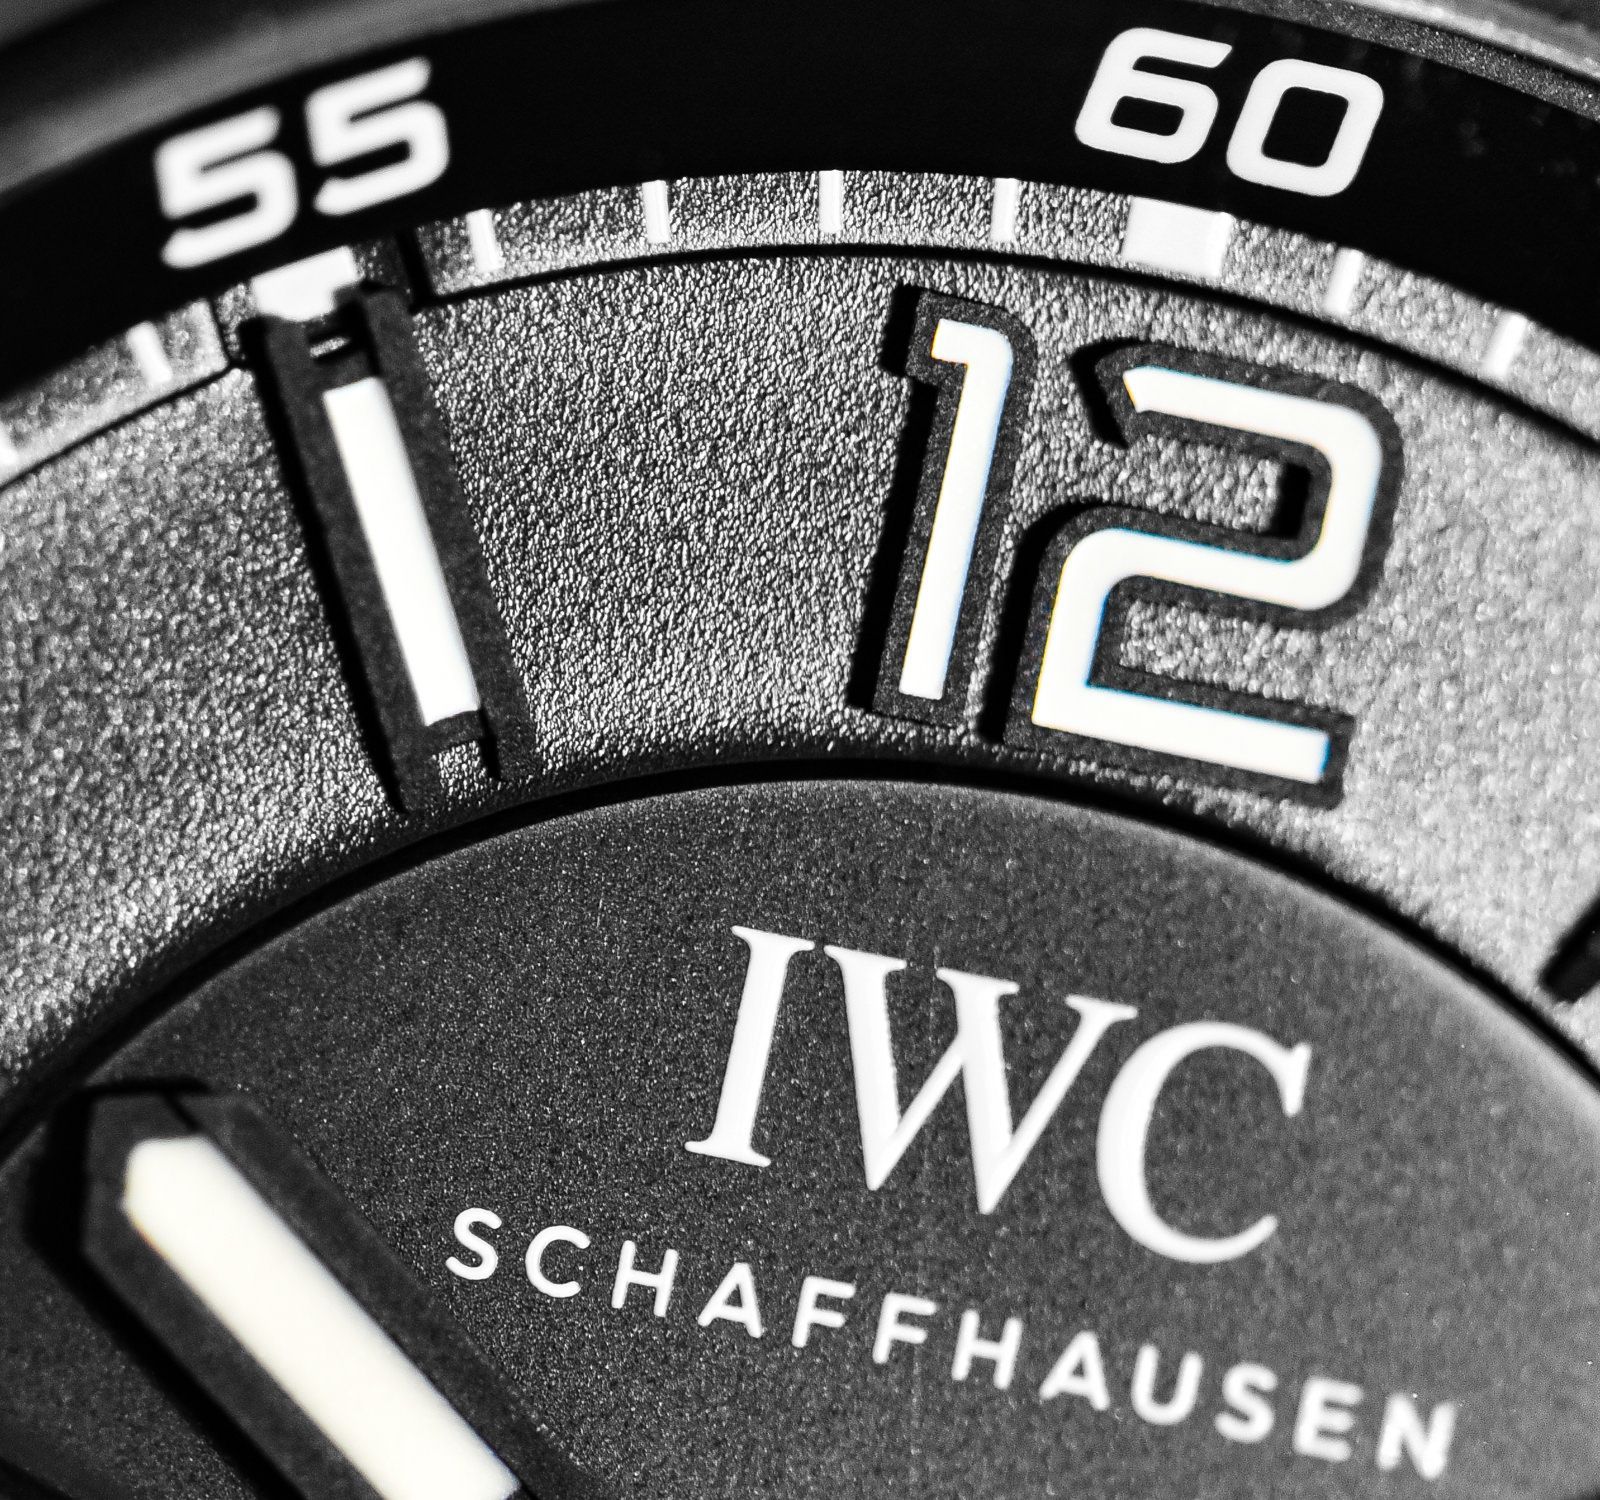 Pre-Owned IWC Ingenieur Price